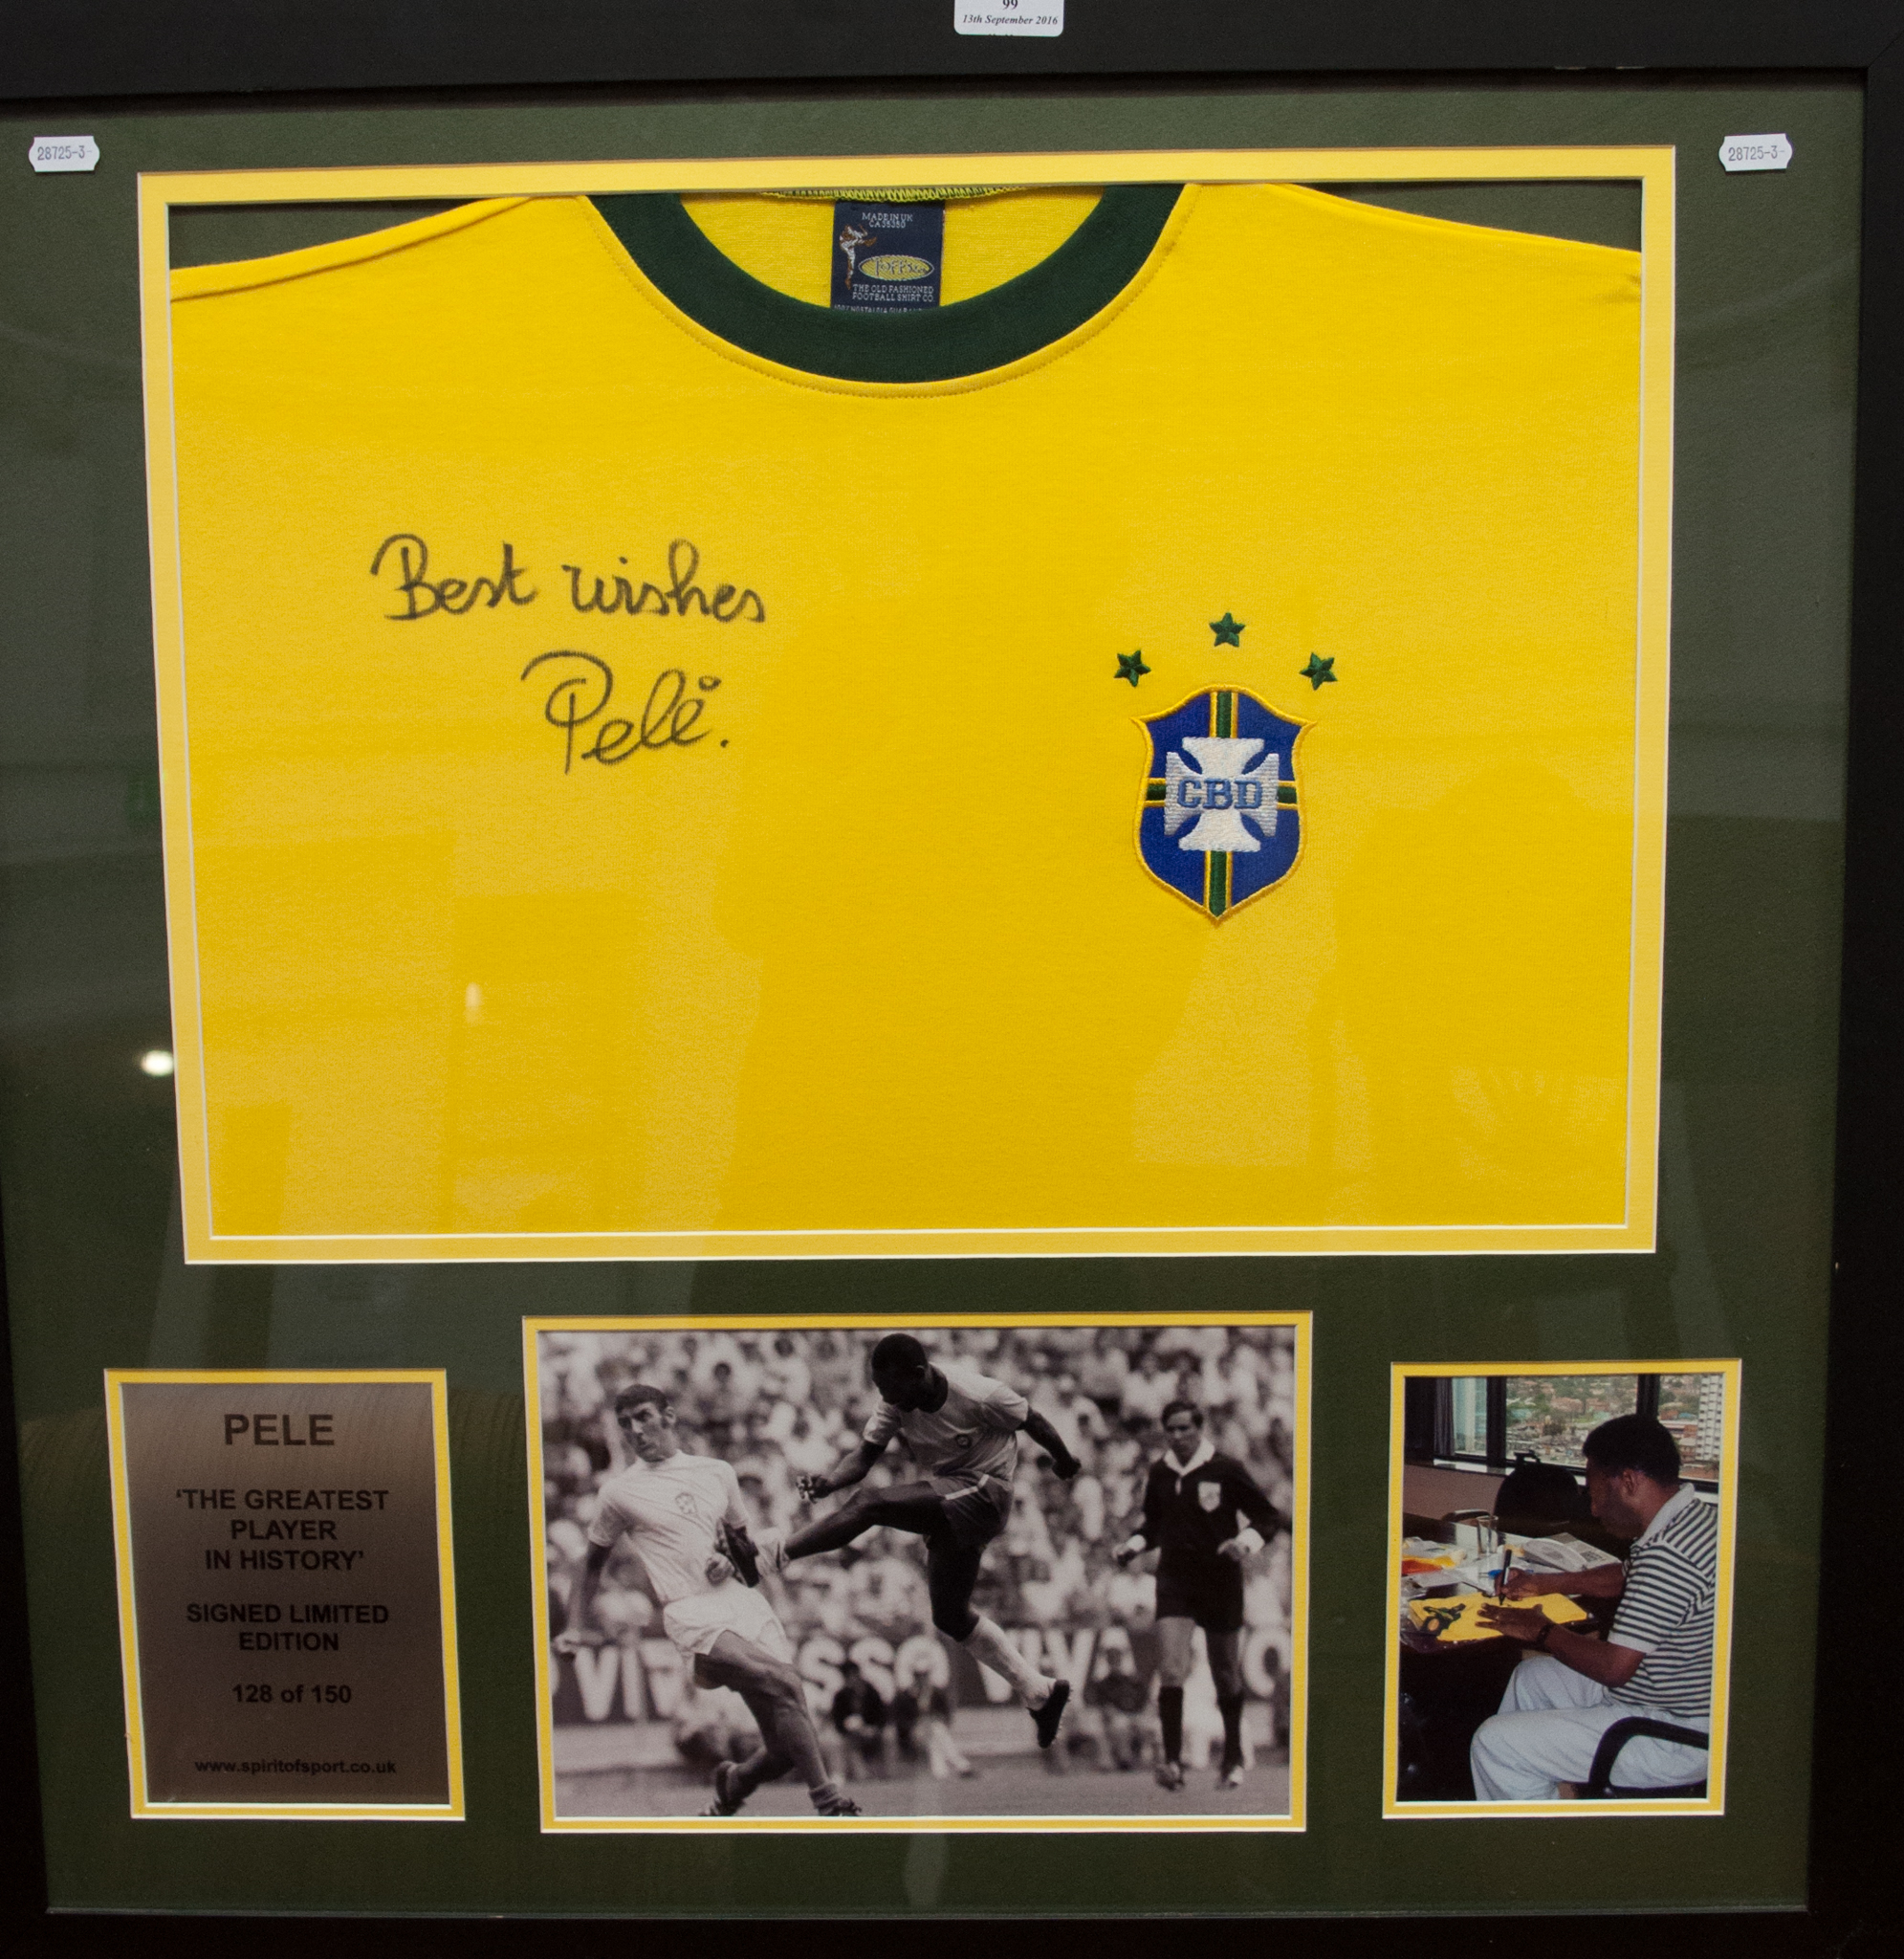 Pele Football Shirt, signed, Limited Edition, Spirit of Sport, framed with certificate.